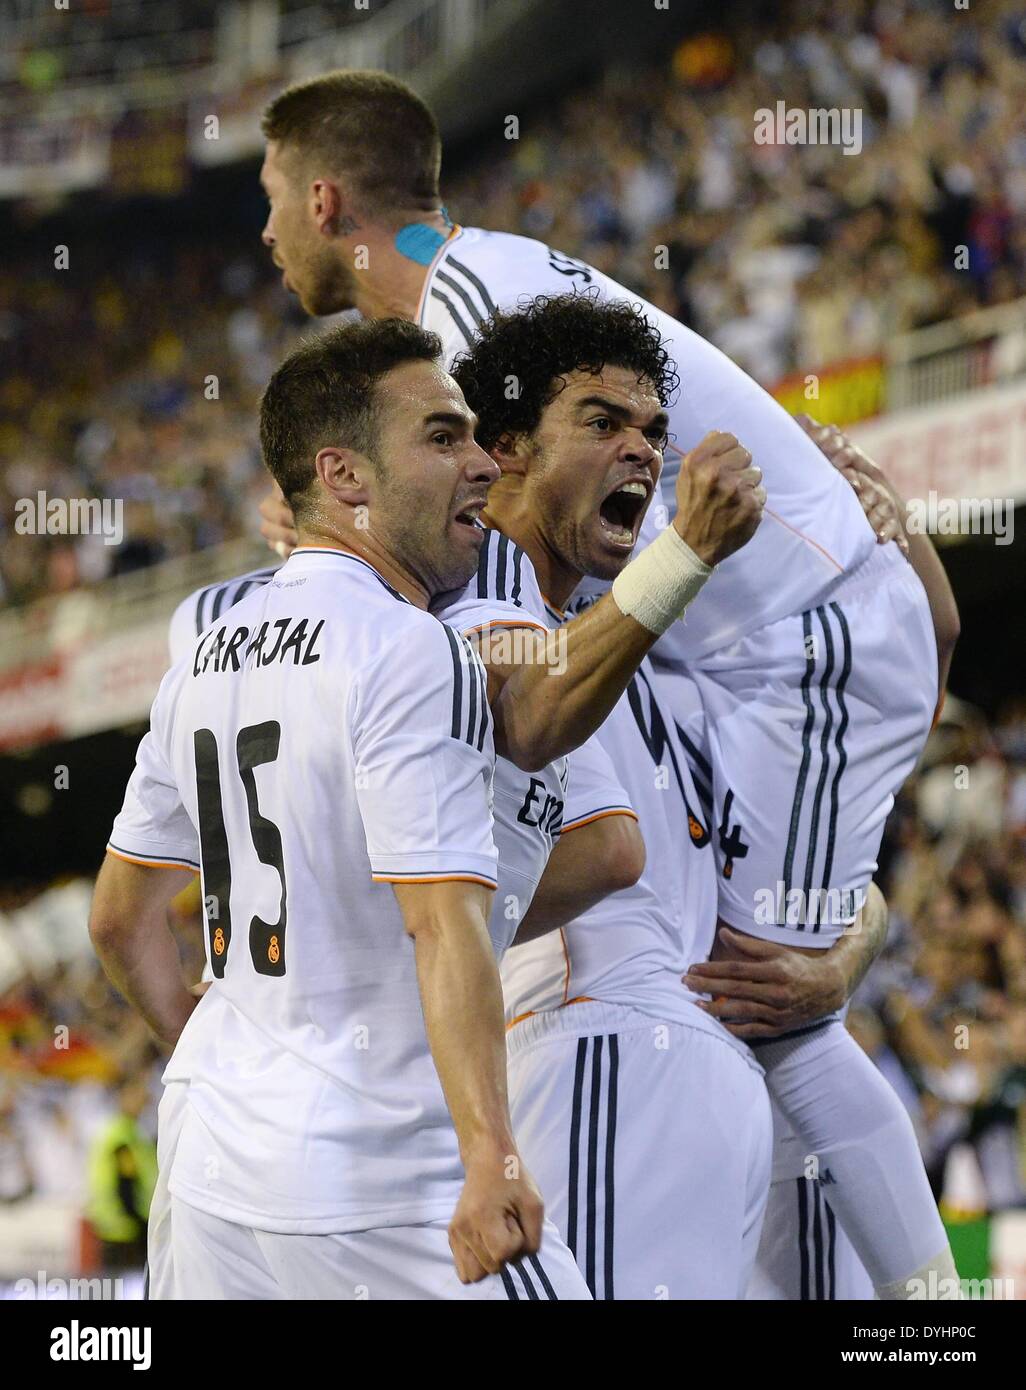 Mestalla, Valencia, Spain. 16th Apr, 2014. Copa Del Rey Cup final. Barcelona versus Real Madrid.Daniel Carvajal, Pepe and Sergio Ramos © Action Plus Sports/Alamy Live News Stock Photo